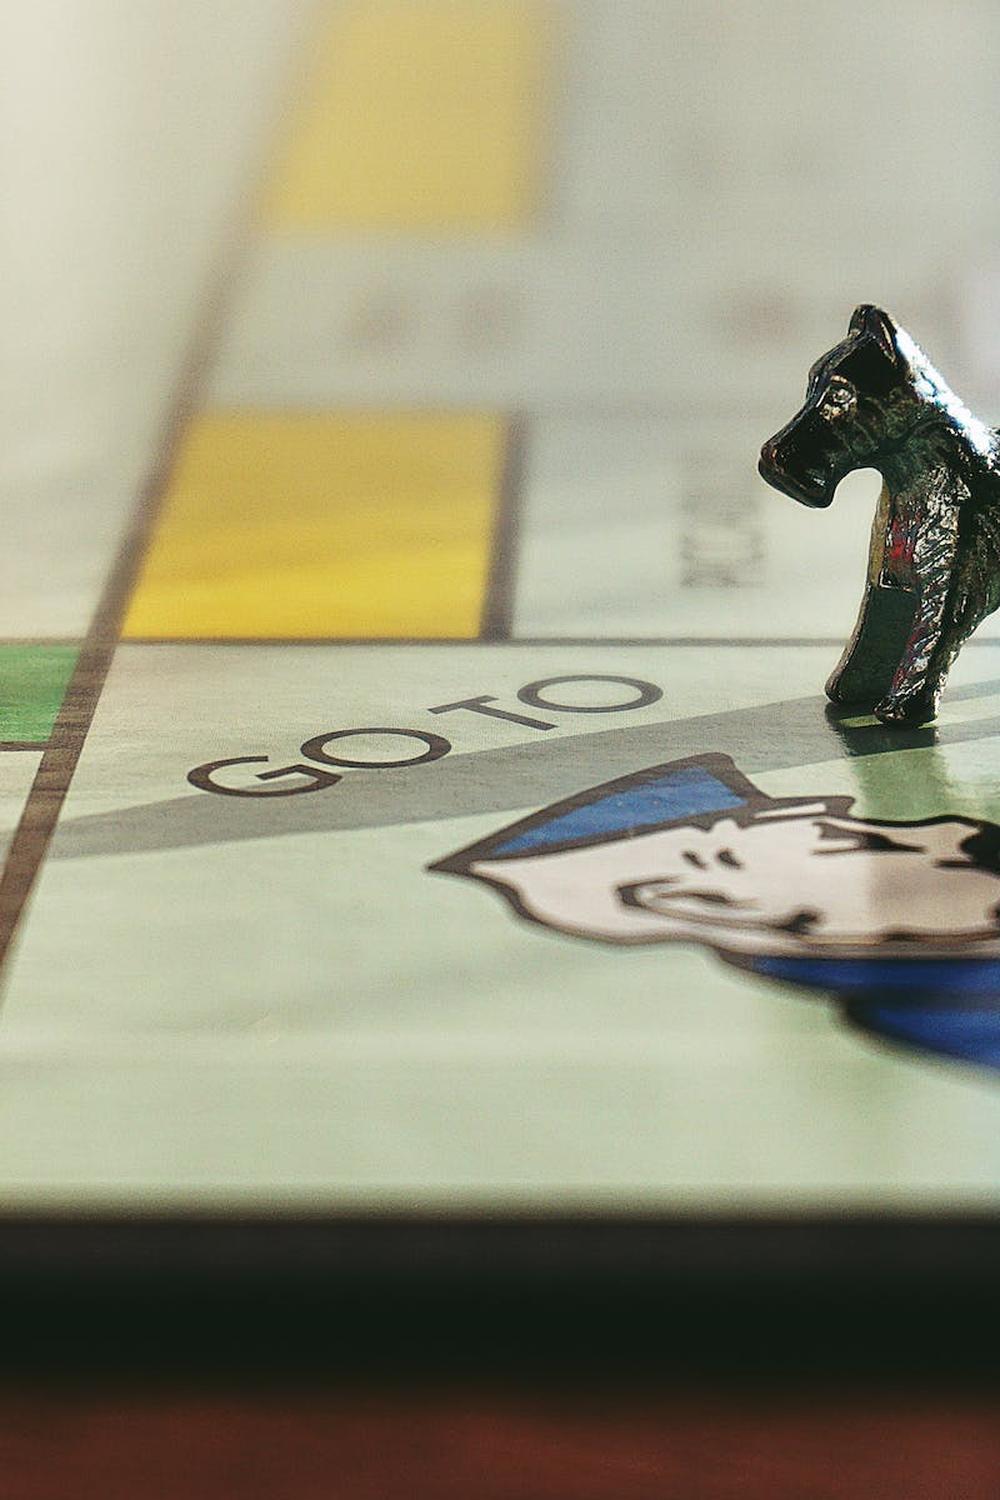 miniature_toy_on_monopoly_board_game